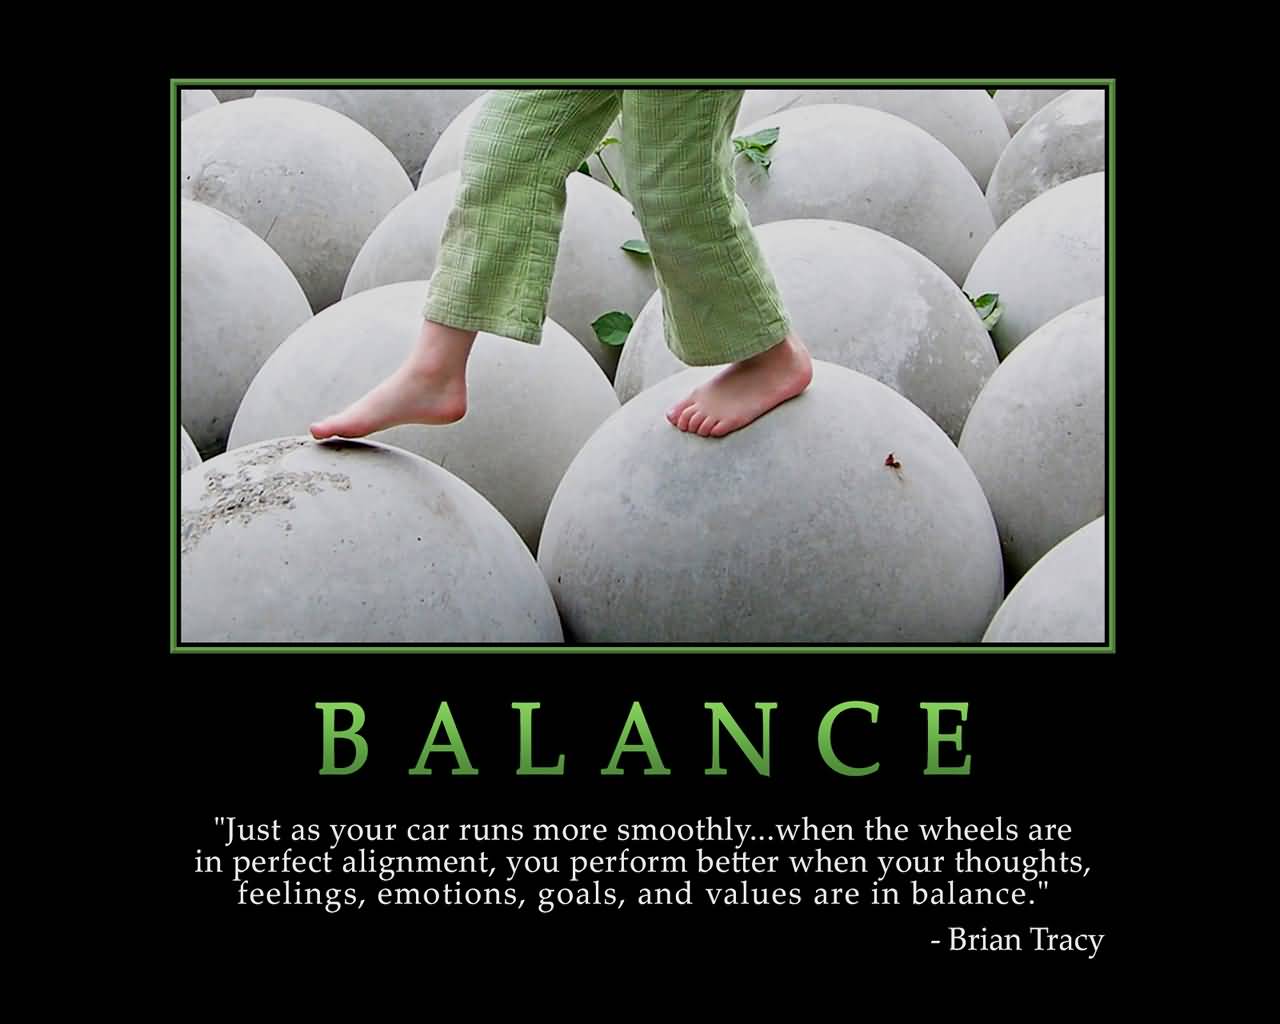 BALANCE Just as your car runs more smoothly...when the wheels are in perfect alignment, you perform better when your thoughts, feelings, emotions, goals... Brian Tracy